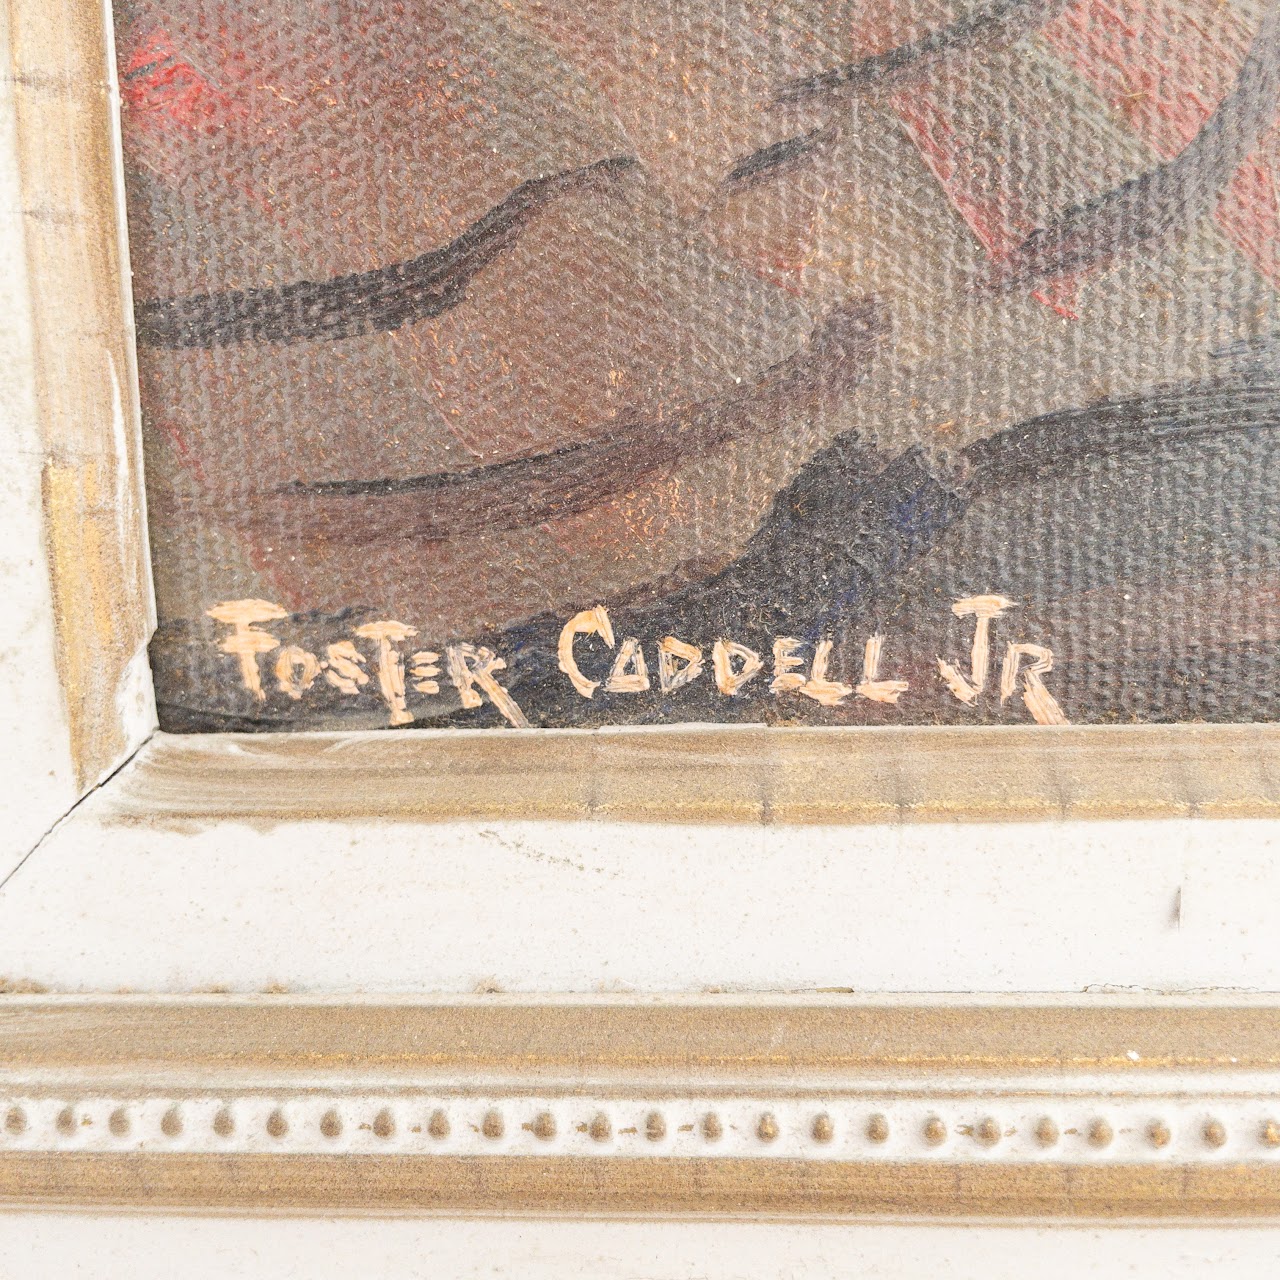 Foster Caddell Jr. Signed Oil Painting